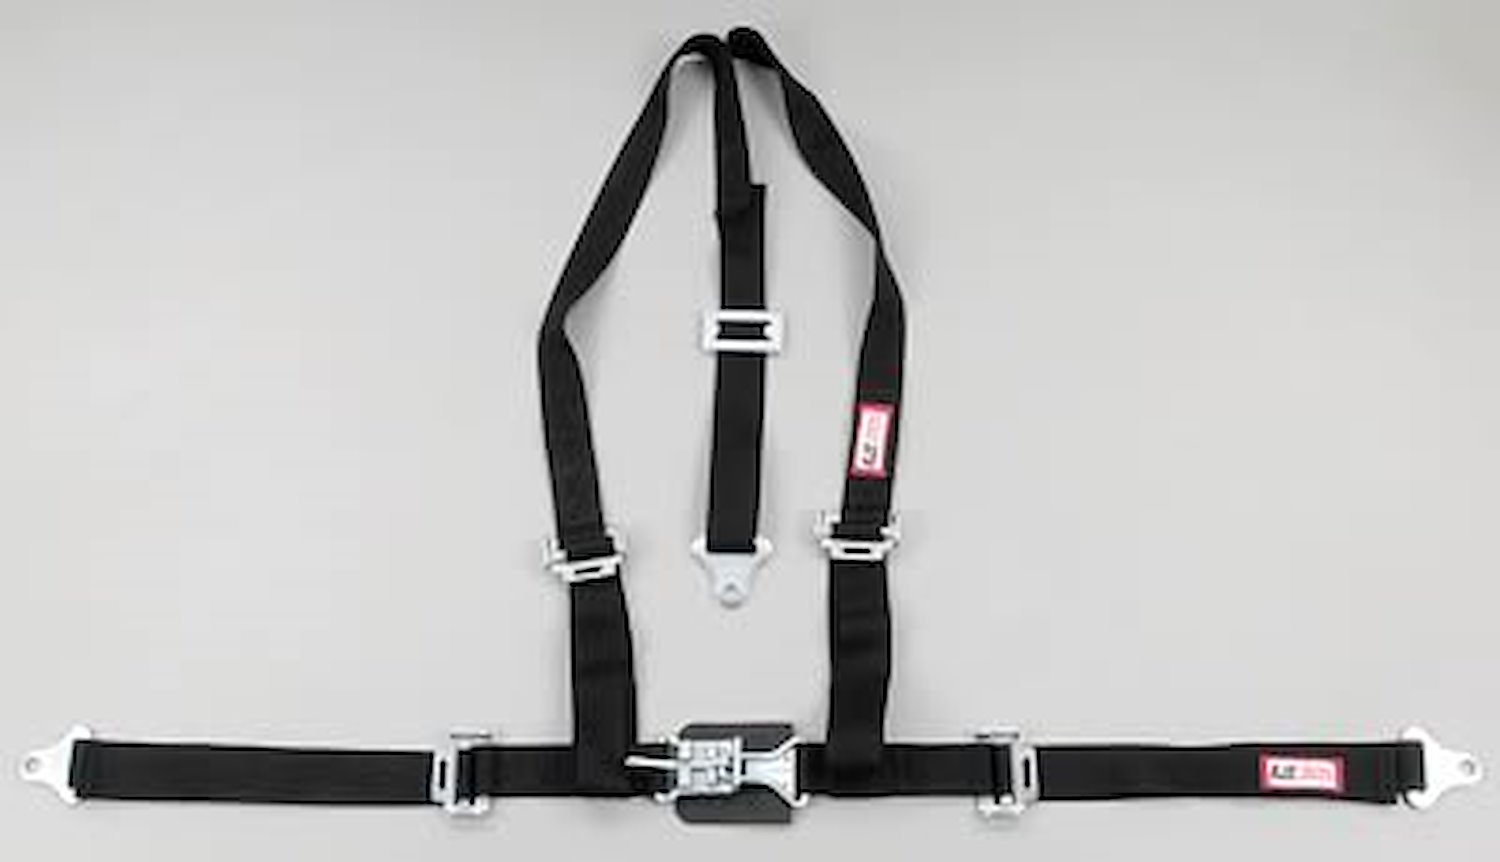 NON-SFI L&L HARNESS 2 PULL UP Lap Belt SNAP SEWN IN 2 S.H. INDIVIDUAL FLOOR Mount WRAP/SNAP PURPLE